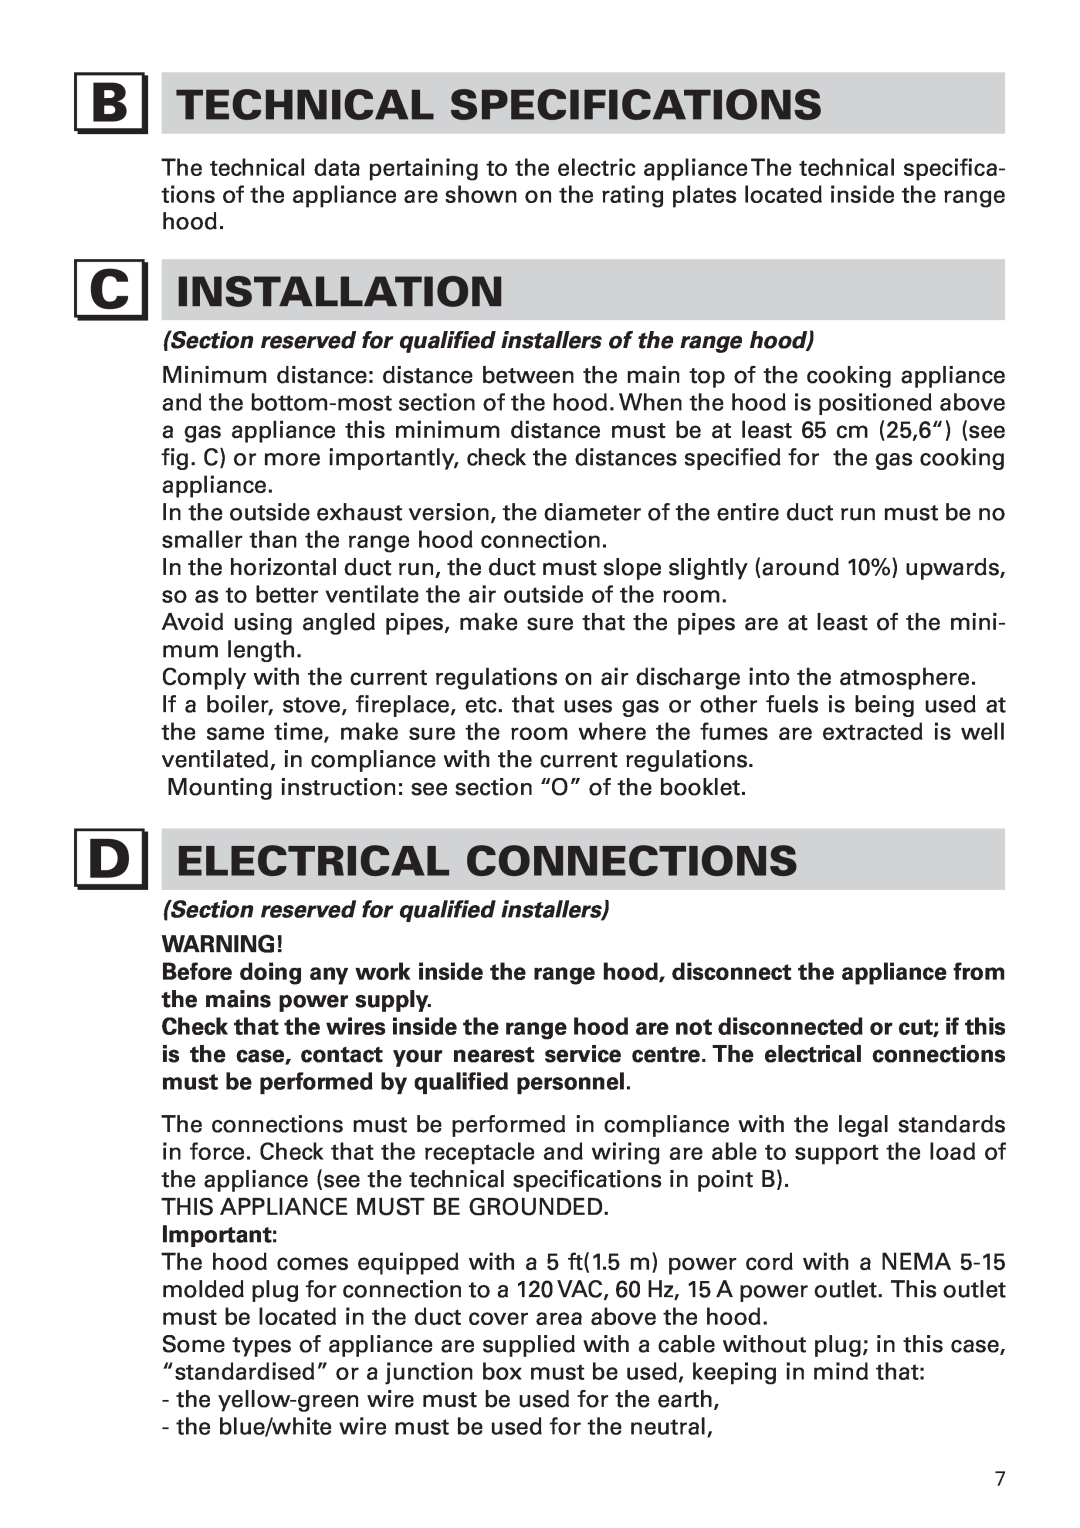 Bertazzoni KIN 36 PRO X manual Technical Specifications, Installation, Electrical Connections 